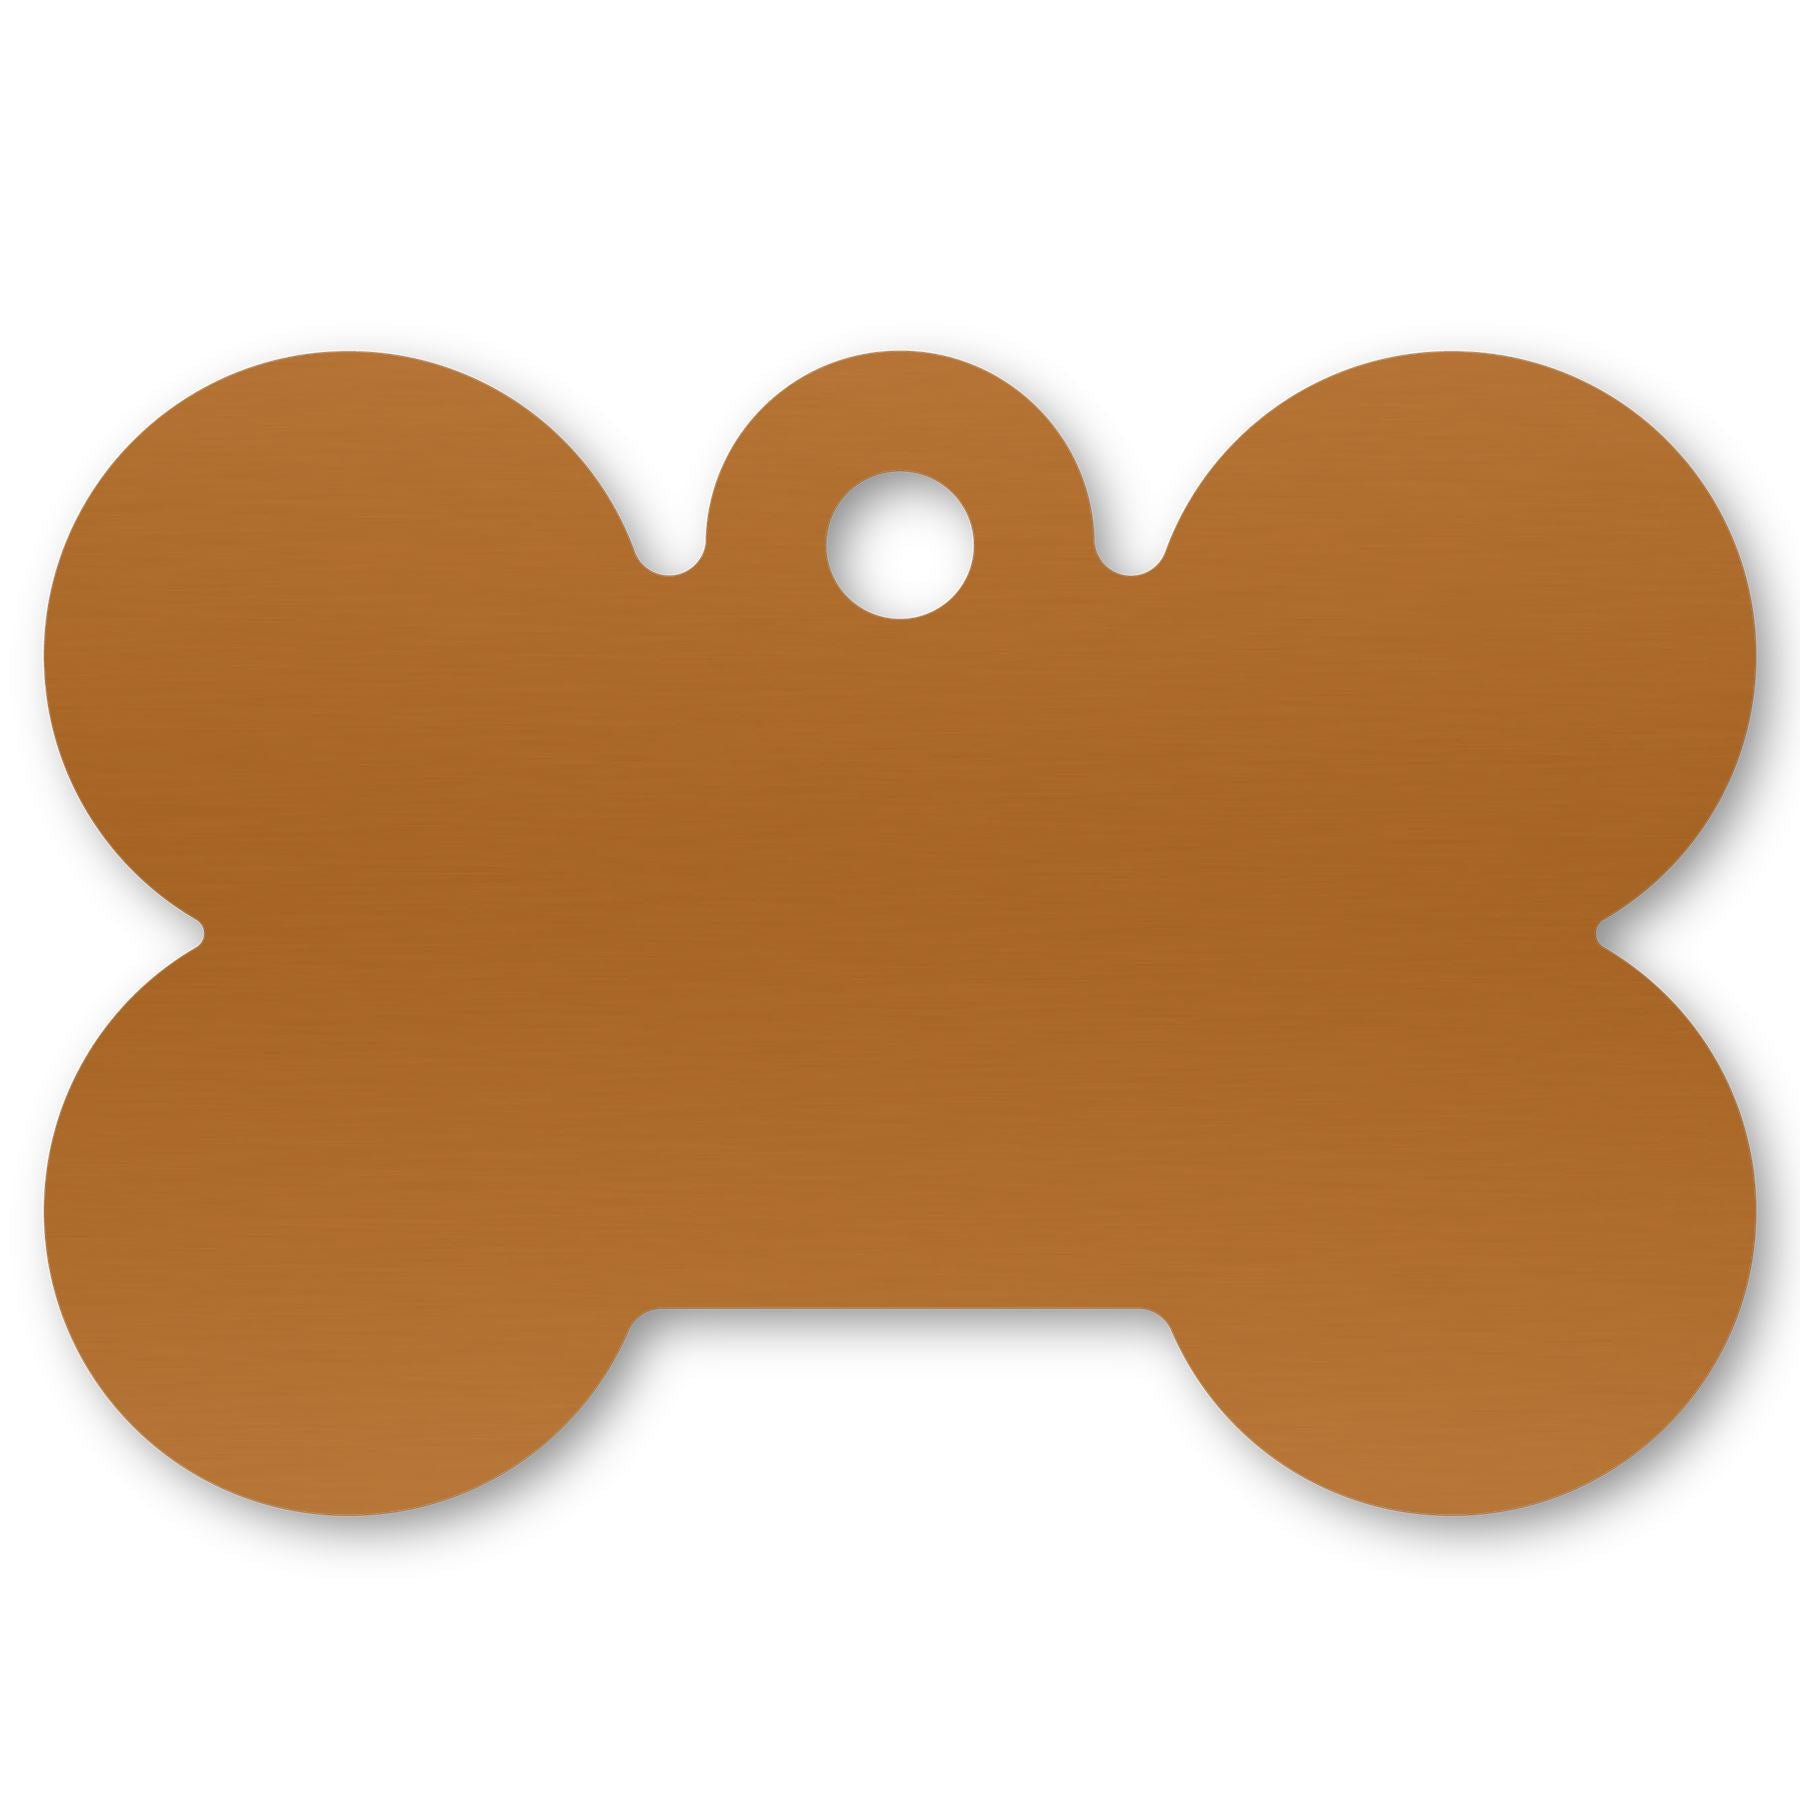 Anodized Aluminum Dog Bone Shaped Tags, 3/4" x 1-1/16" with 3/32" Hole, Laser Engraved Metal Tags Craftworks NW Orange 